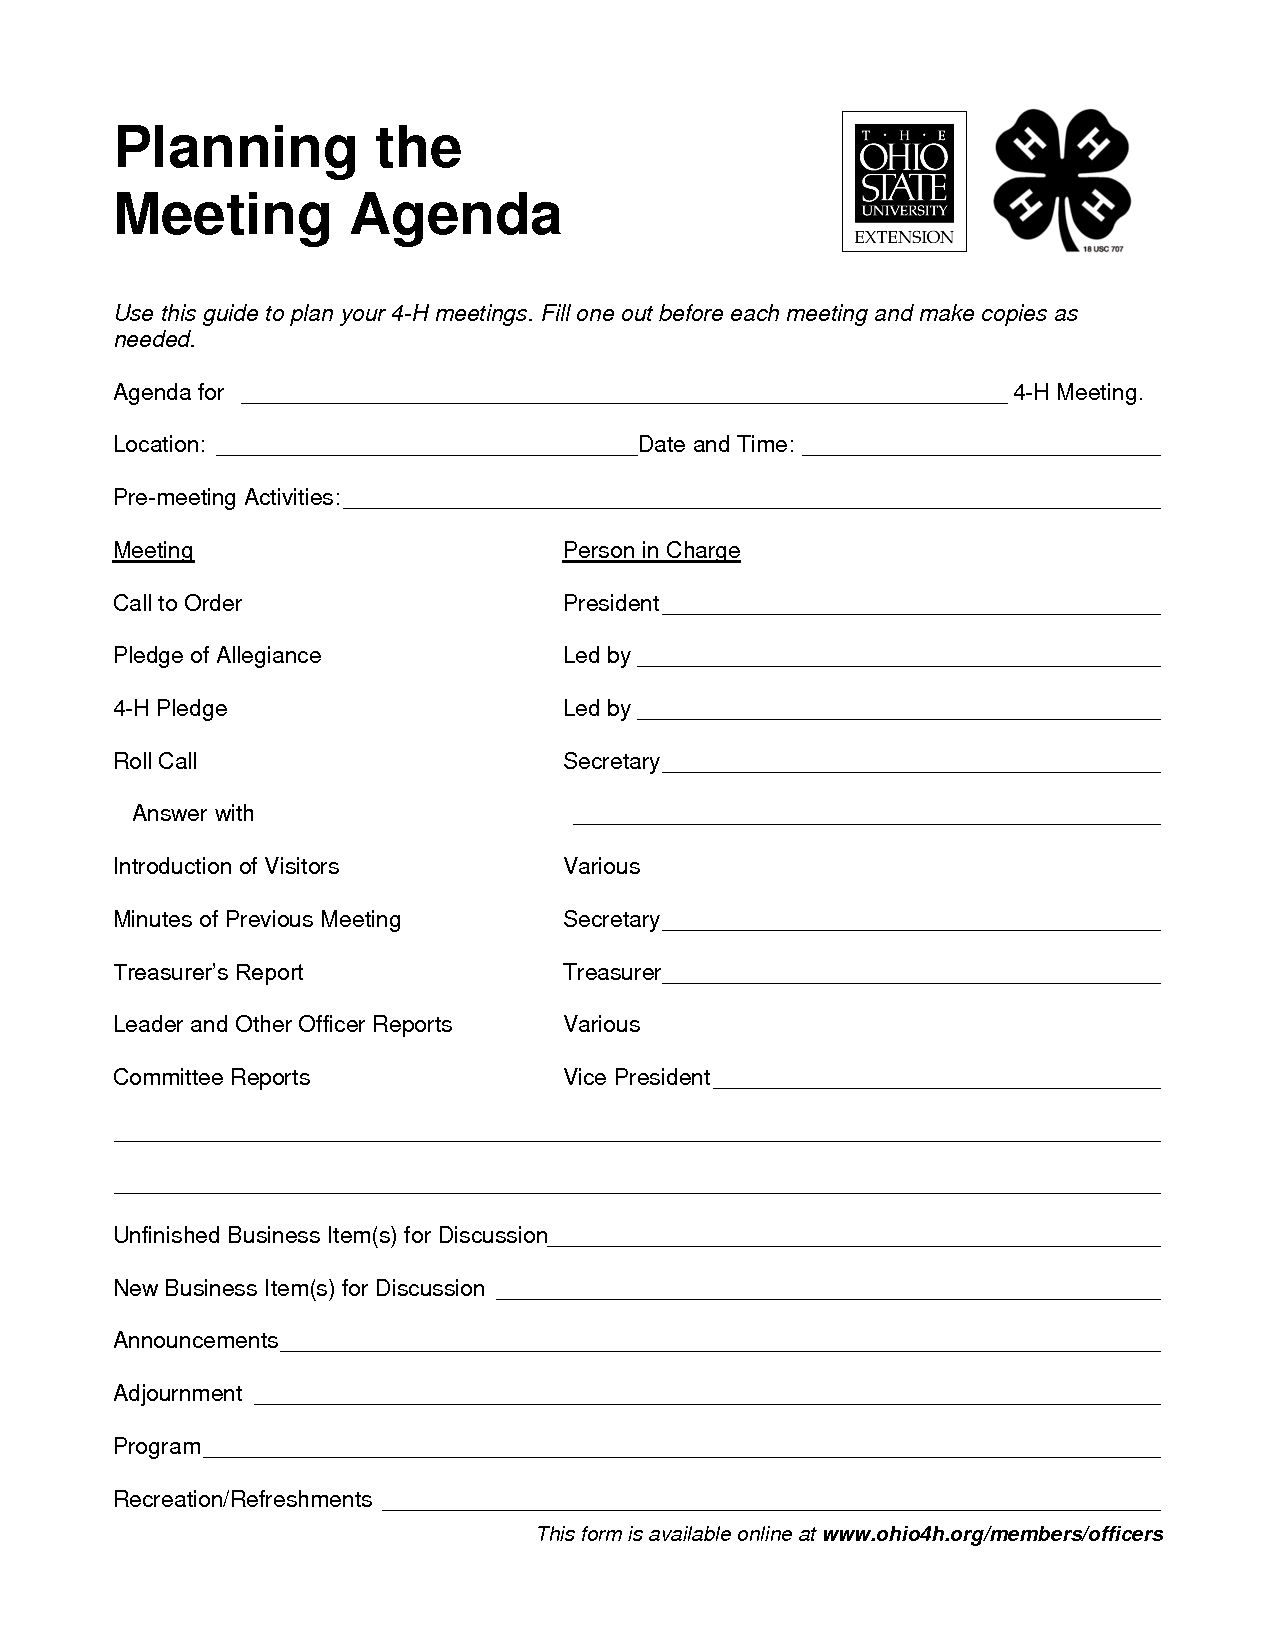 4 H Meeting Agenda Template Google Search Meeting Agenda throughout sizing 1275 X 1650